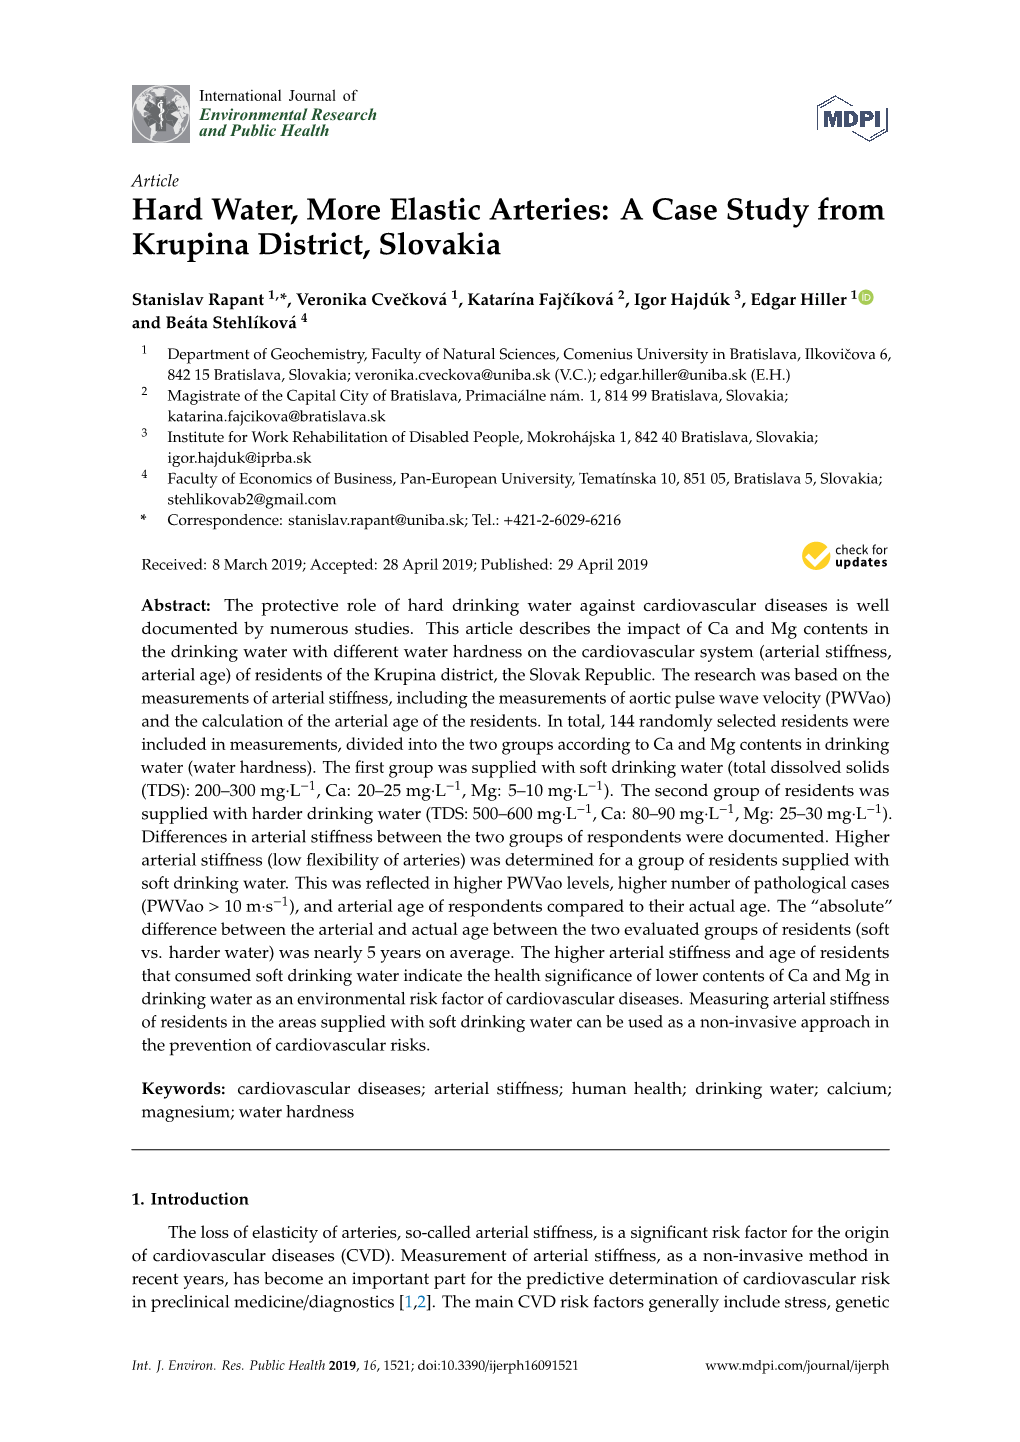 Hard Water, More Elastic Arteries: a Case Study from Krupina District, Slovakia